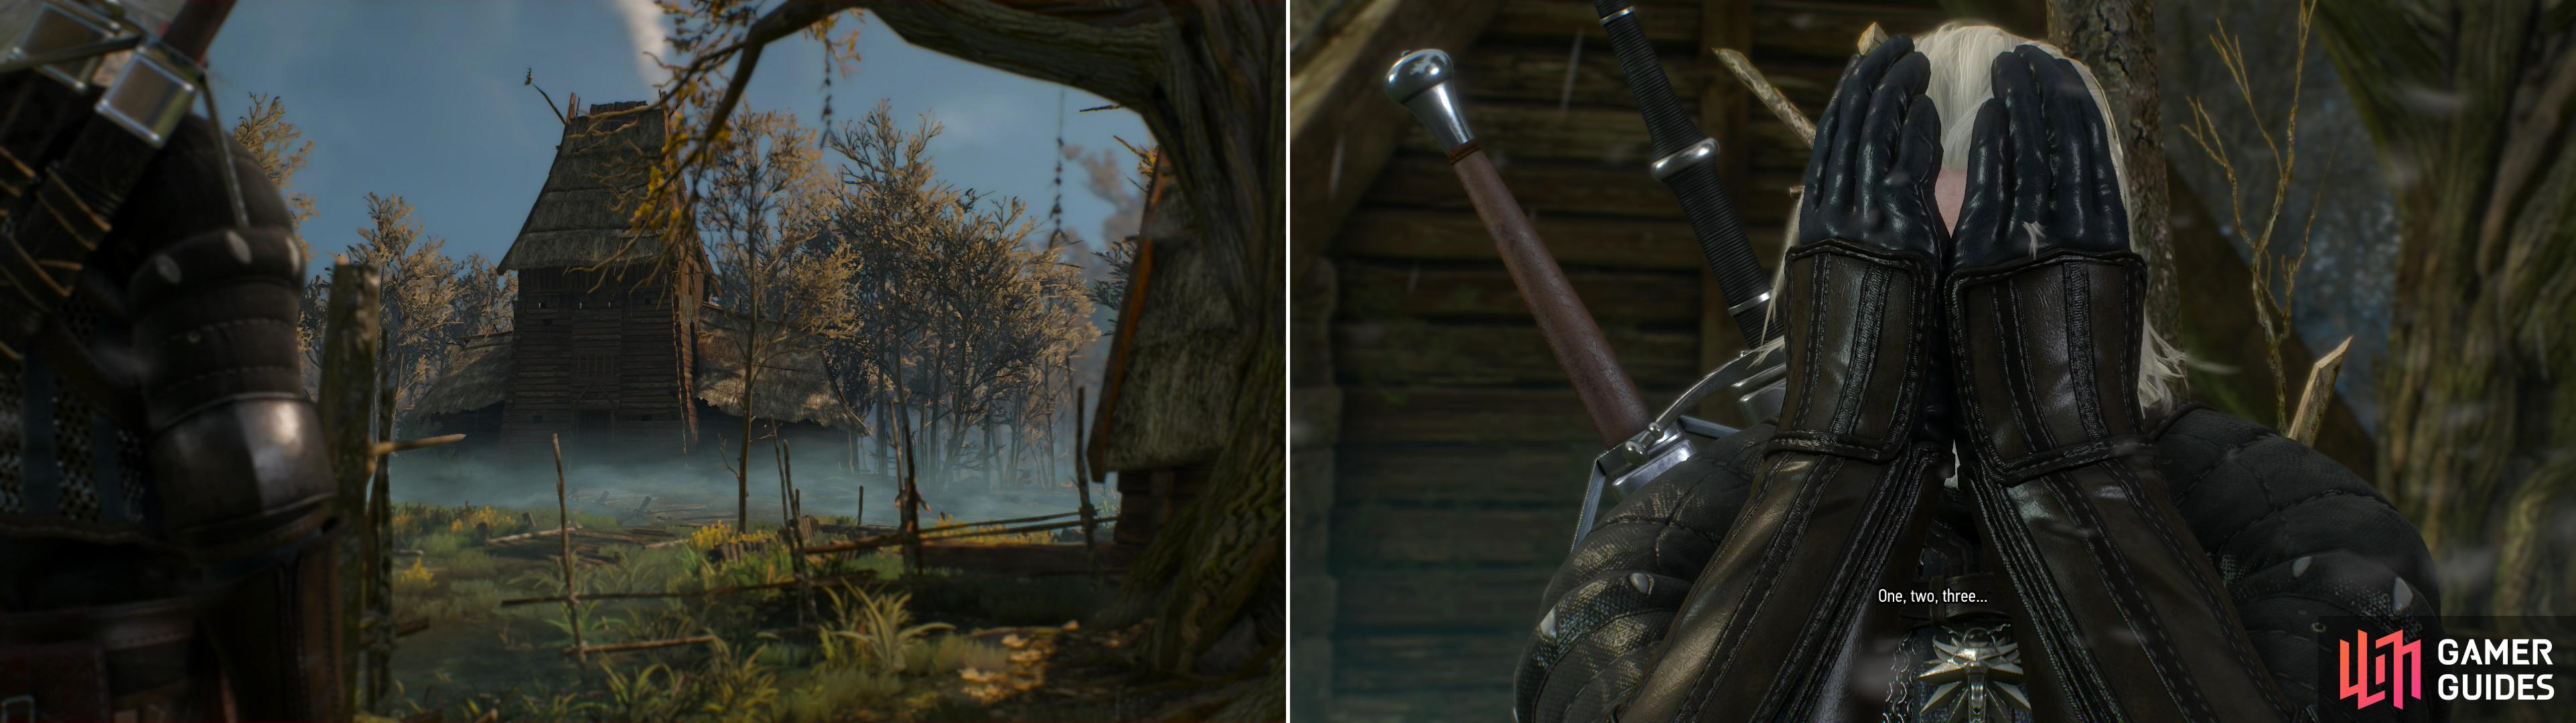 You’ll find a small settlement in the middle of the swamp, at the end of the Trail of Treats (left). After Gran spoils your search, participate in a game of hide-and-seek with the children (right).